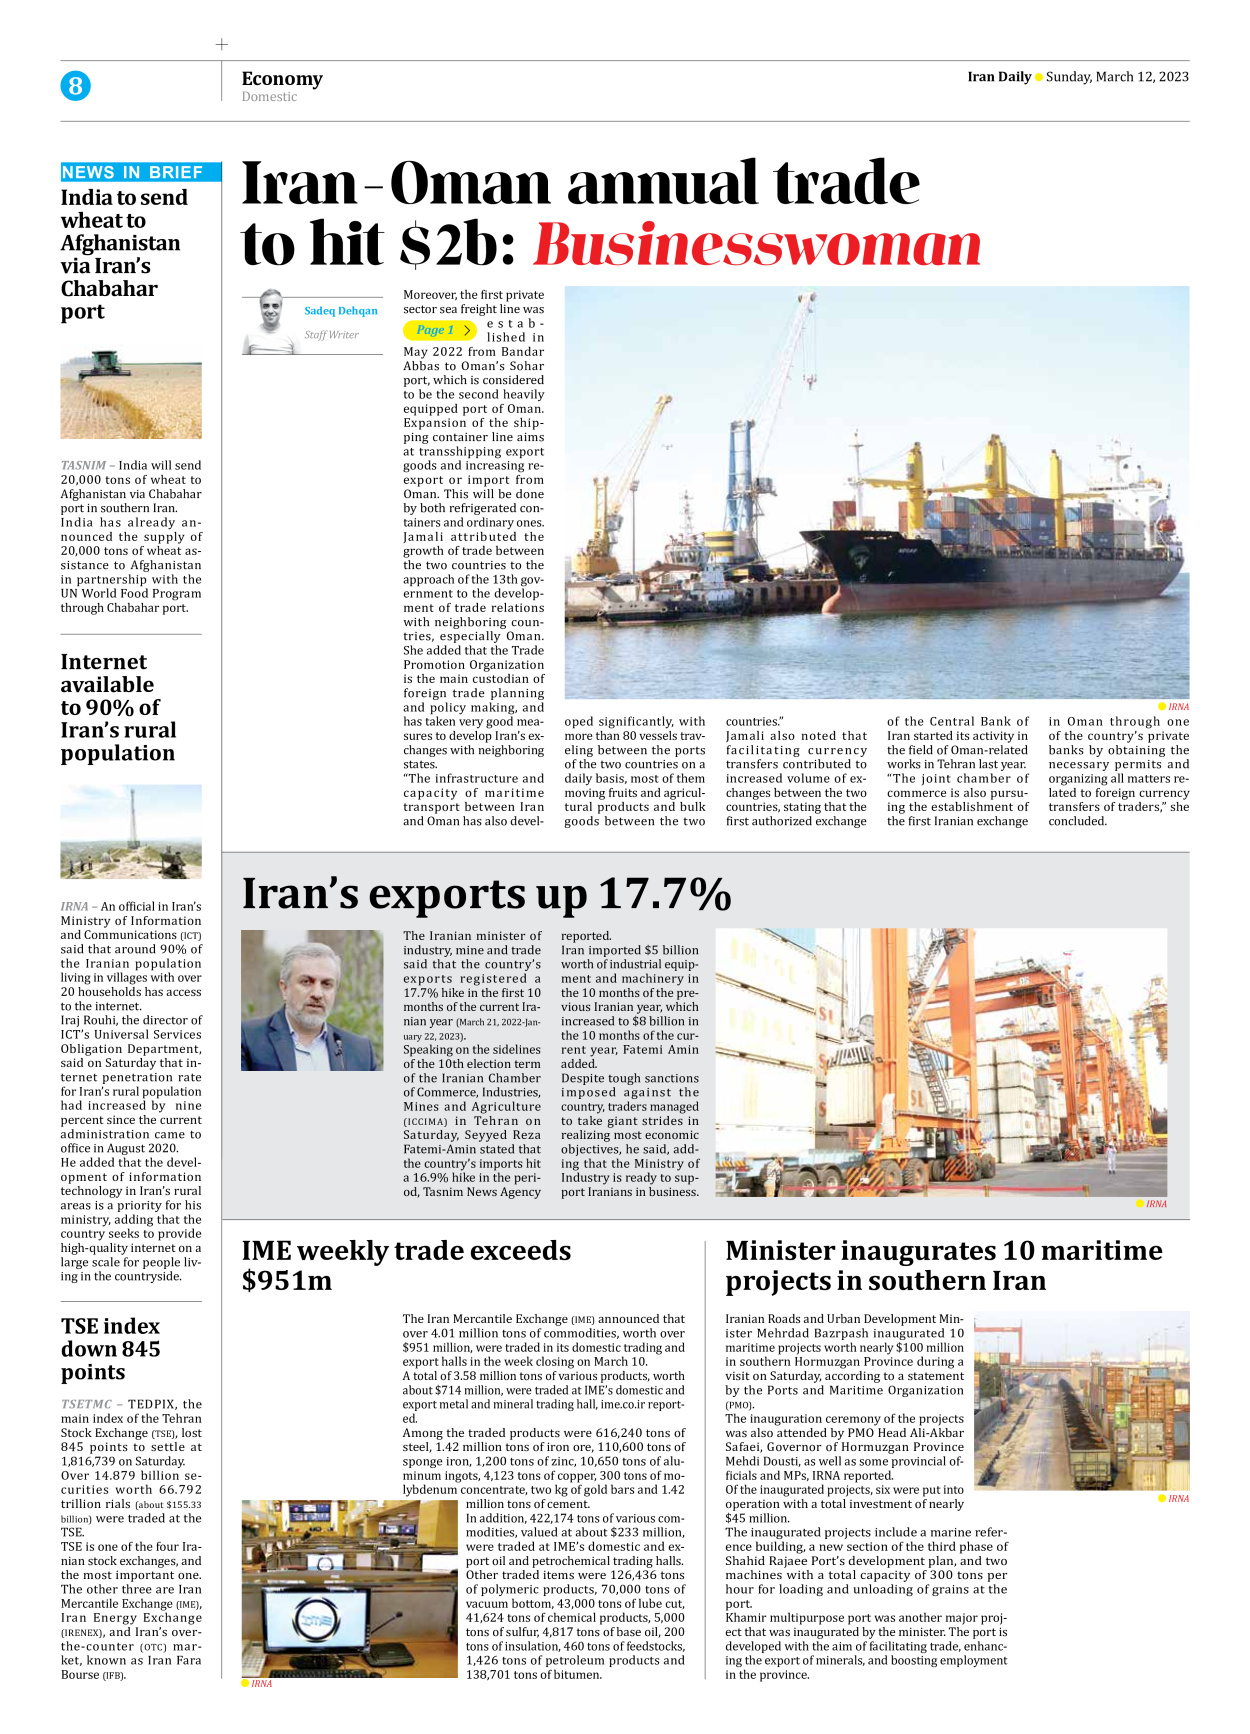 Iran Daily - Number Seven Thousand Two Hundred and Fifty Five - 12 March 2023 - Page 8